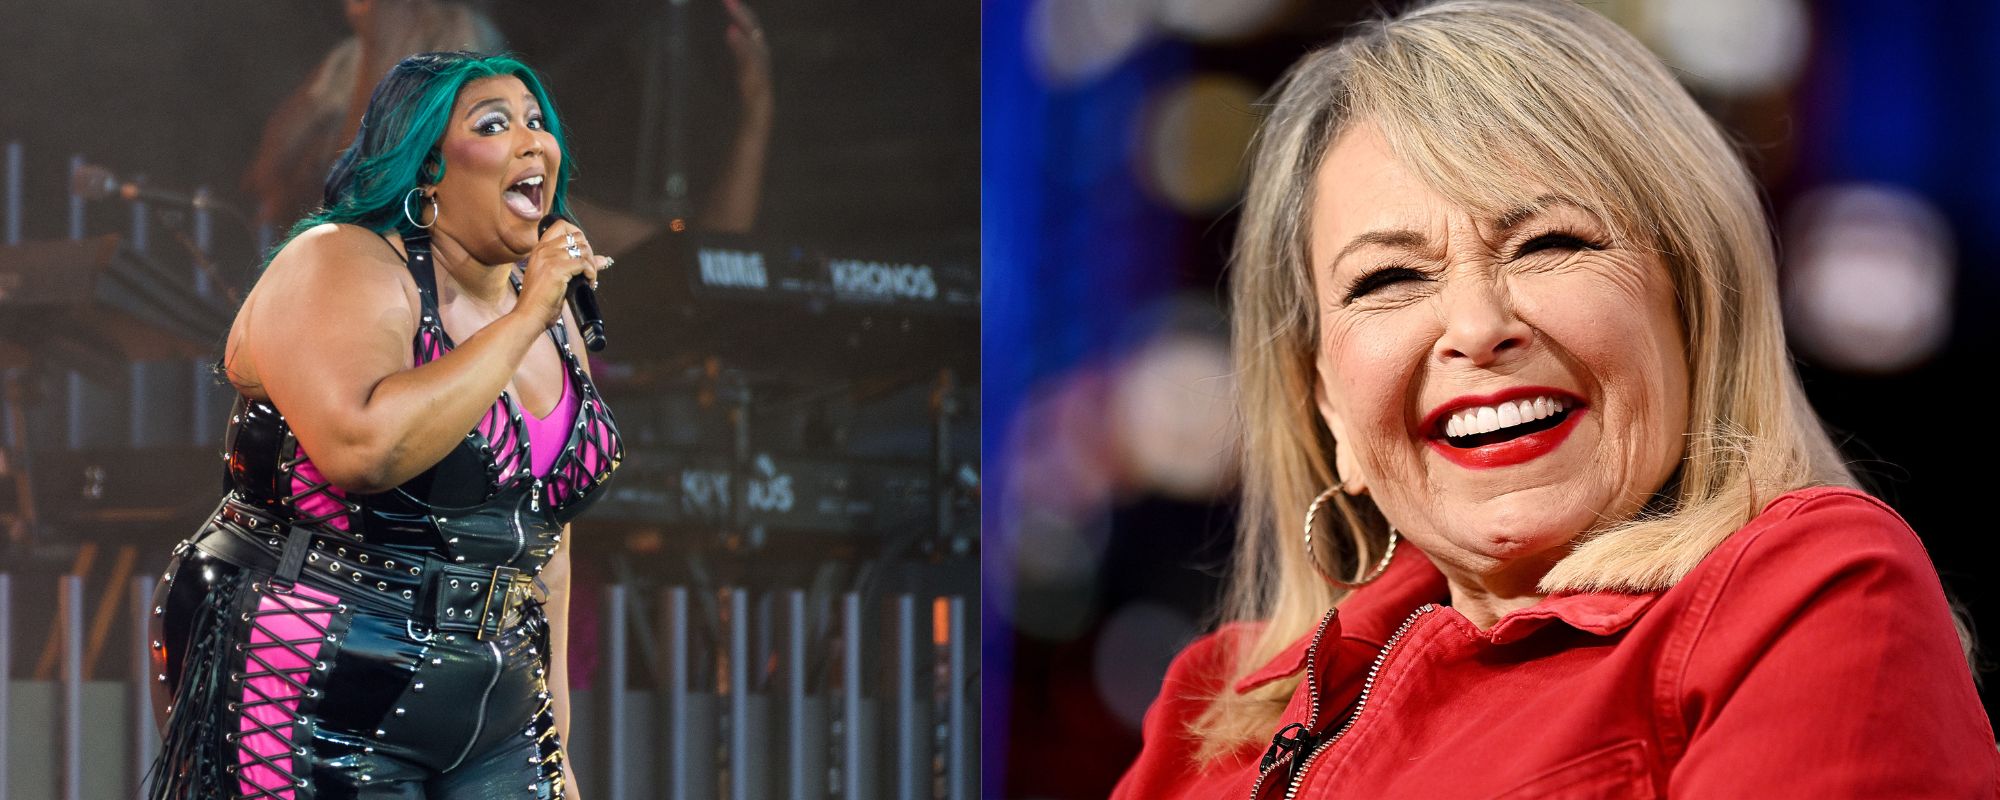 Roseanne Barr Claims Lizzo Should Thank Her For ‘Paving The Way’ For Body Positivity